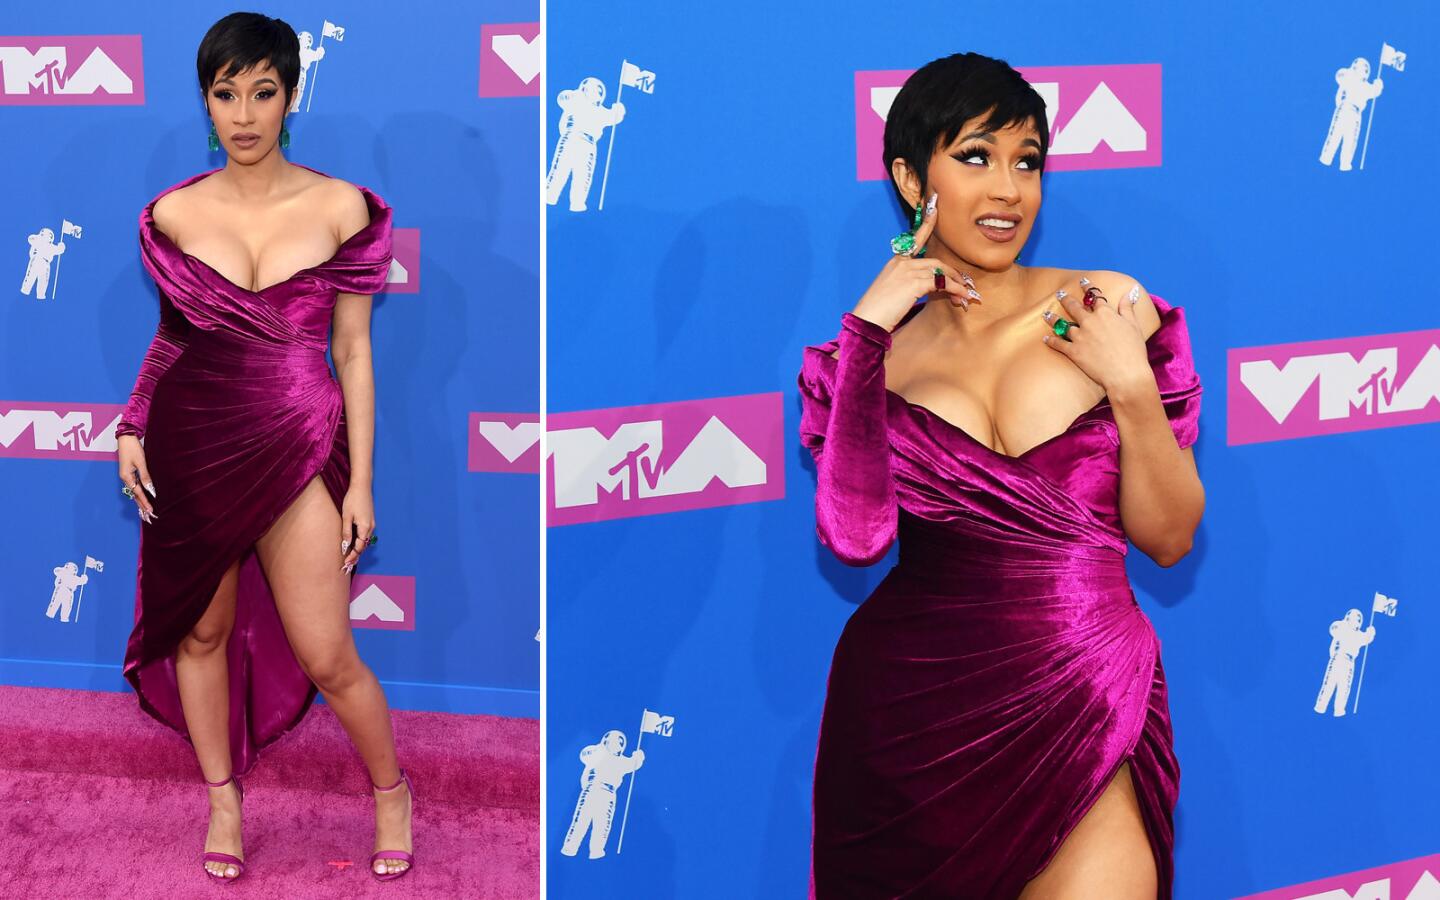 Rapper and multiple nominee Cardi B attends the 2018 MTV Video Music Awards on Monday night at Radio City Music Hall in New York City.